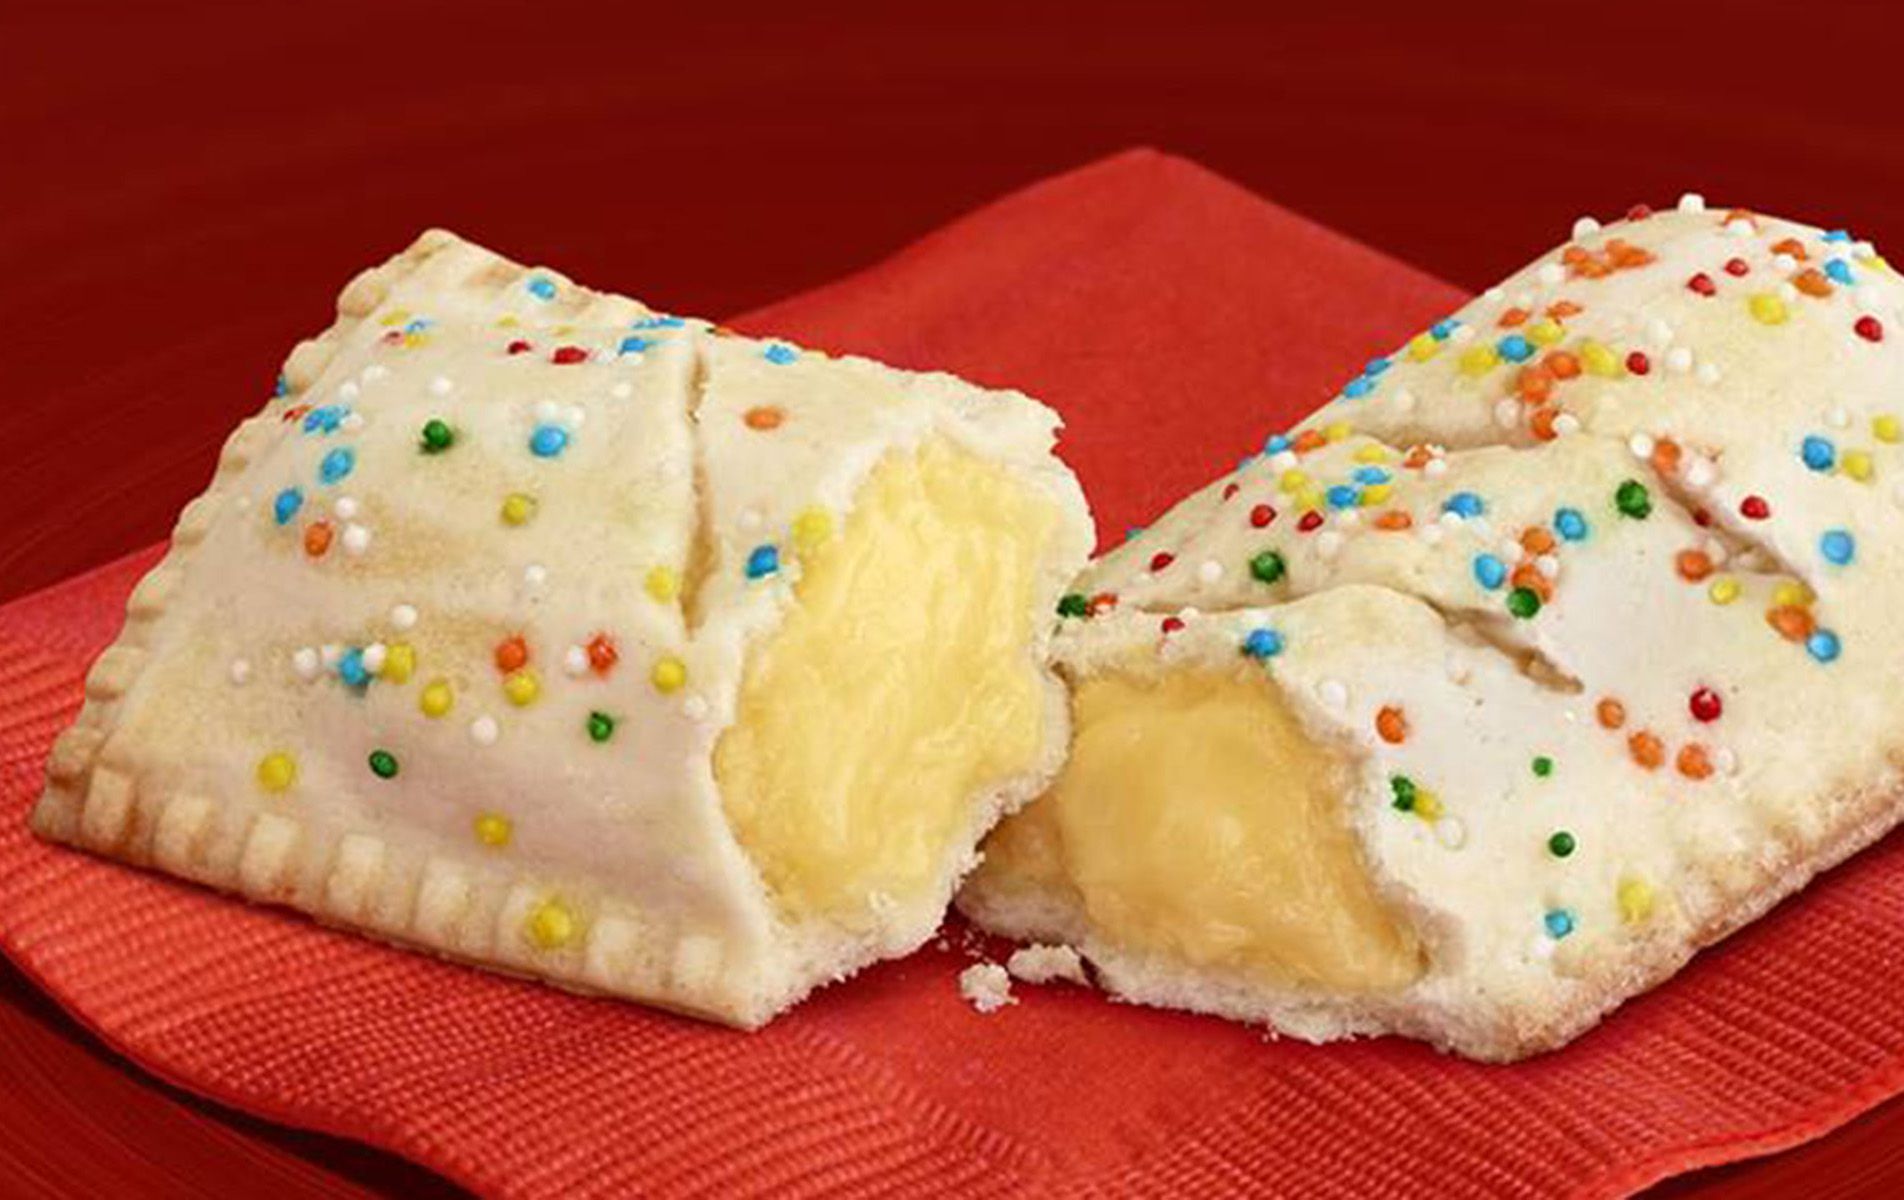 Select McDonald's Restaurants Bring Back their Holiday Pie and Peppermint Mocha for a Limited Time Only